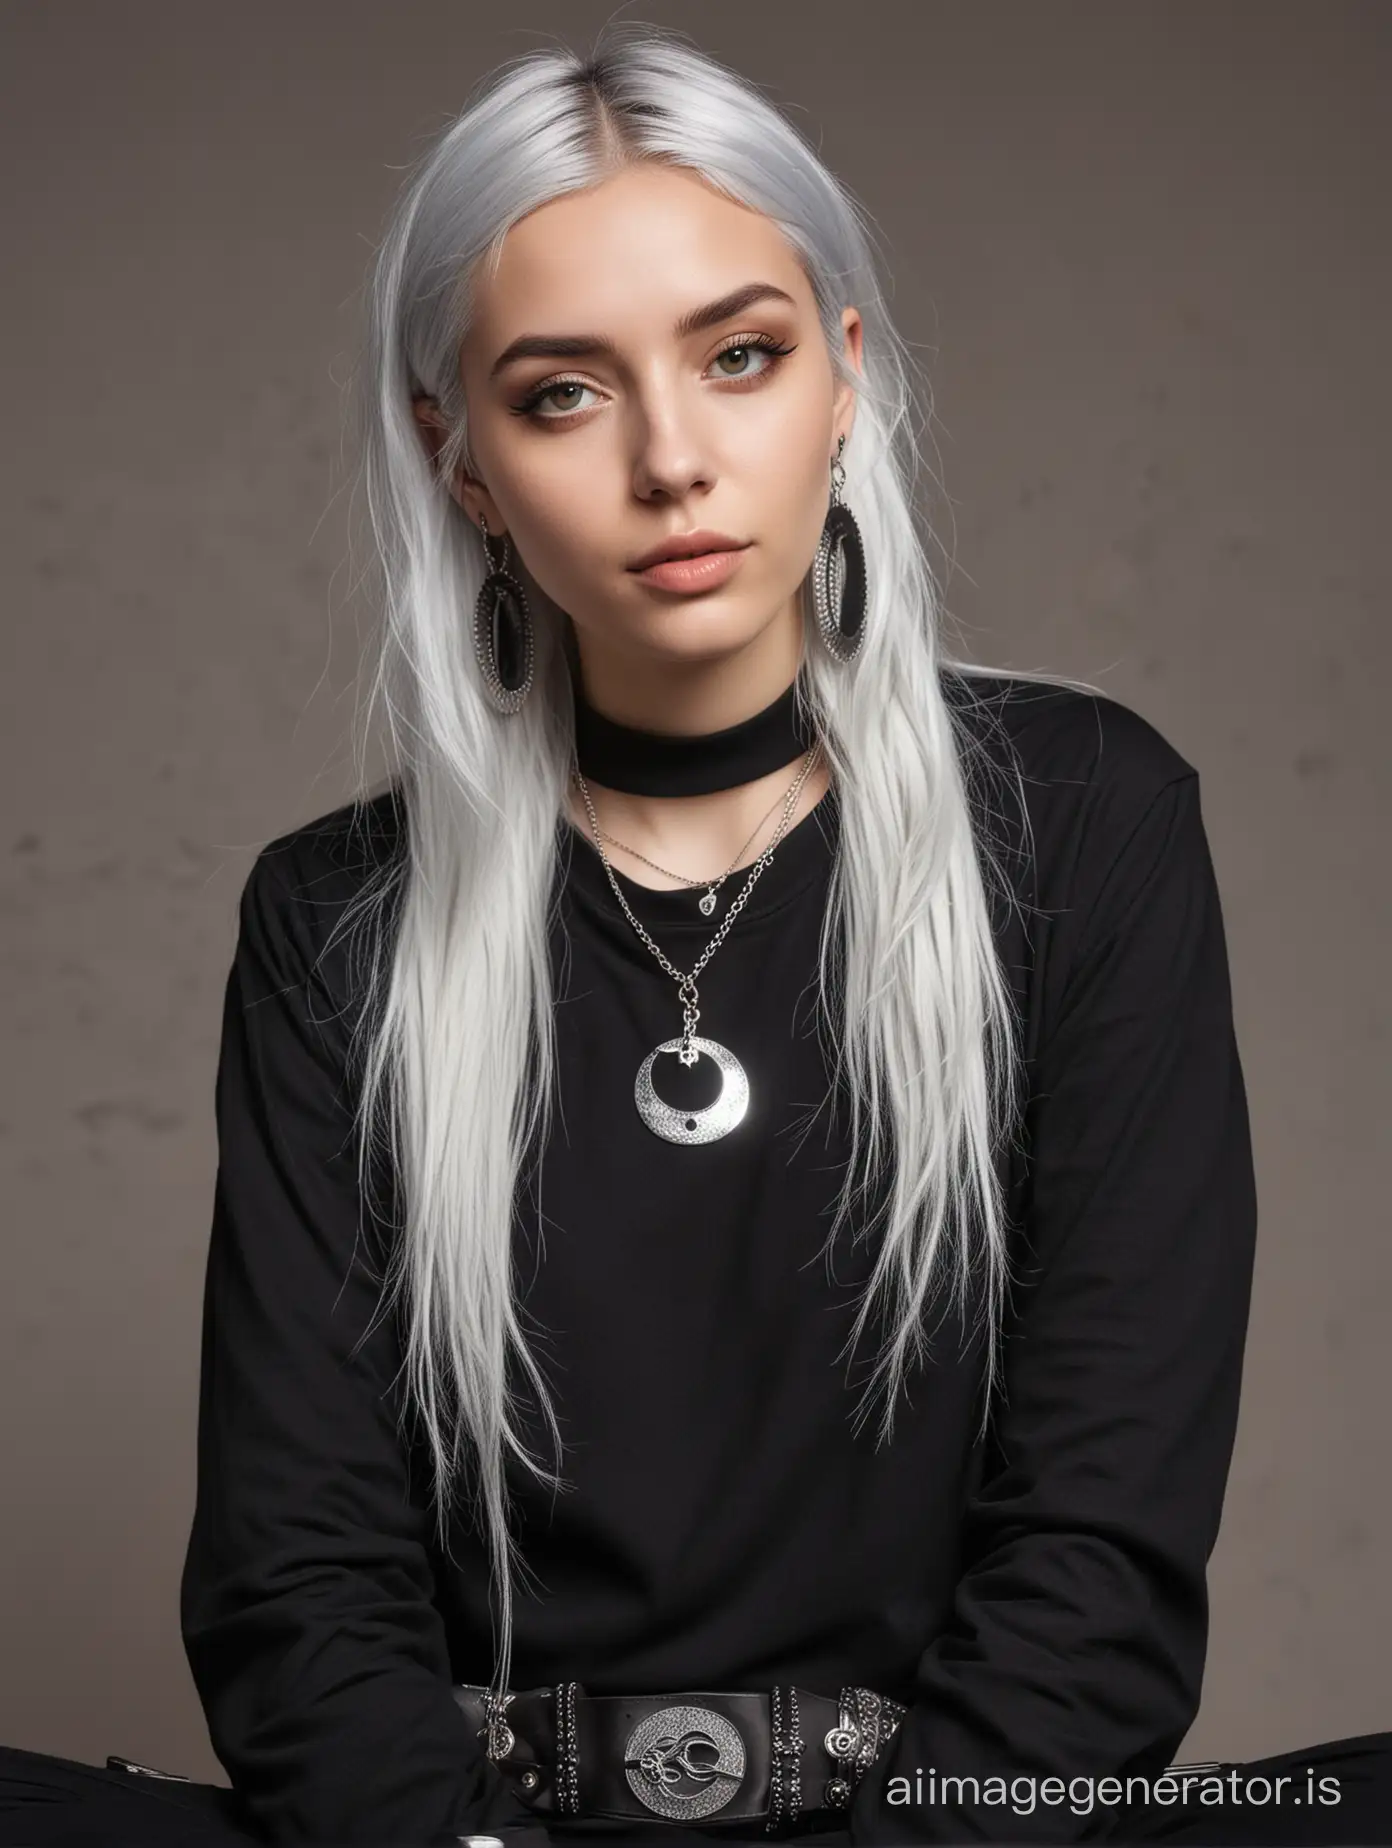 Stylish-Young-Woman-with-Grey-Hair-and-Dark-Academia-Fashion-in-Silver-Jewelry-and-Doc-Martens-Boots